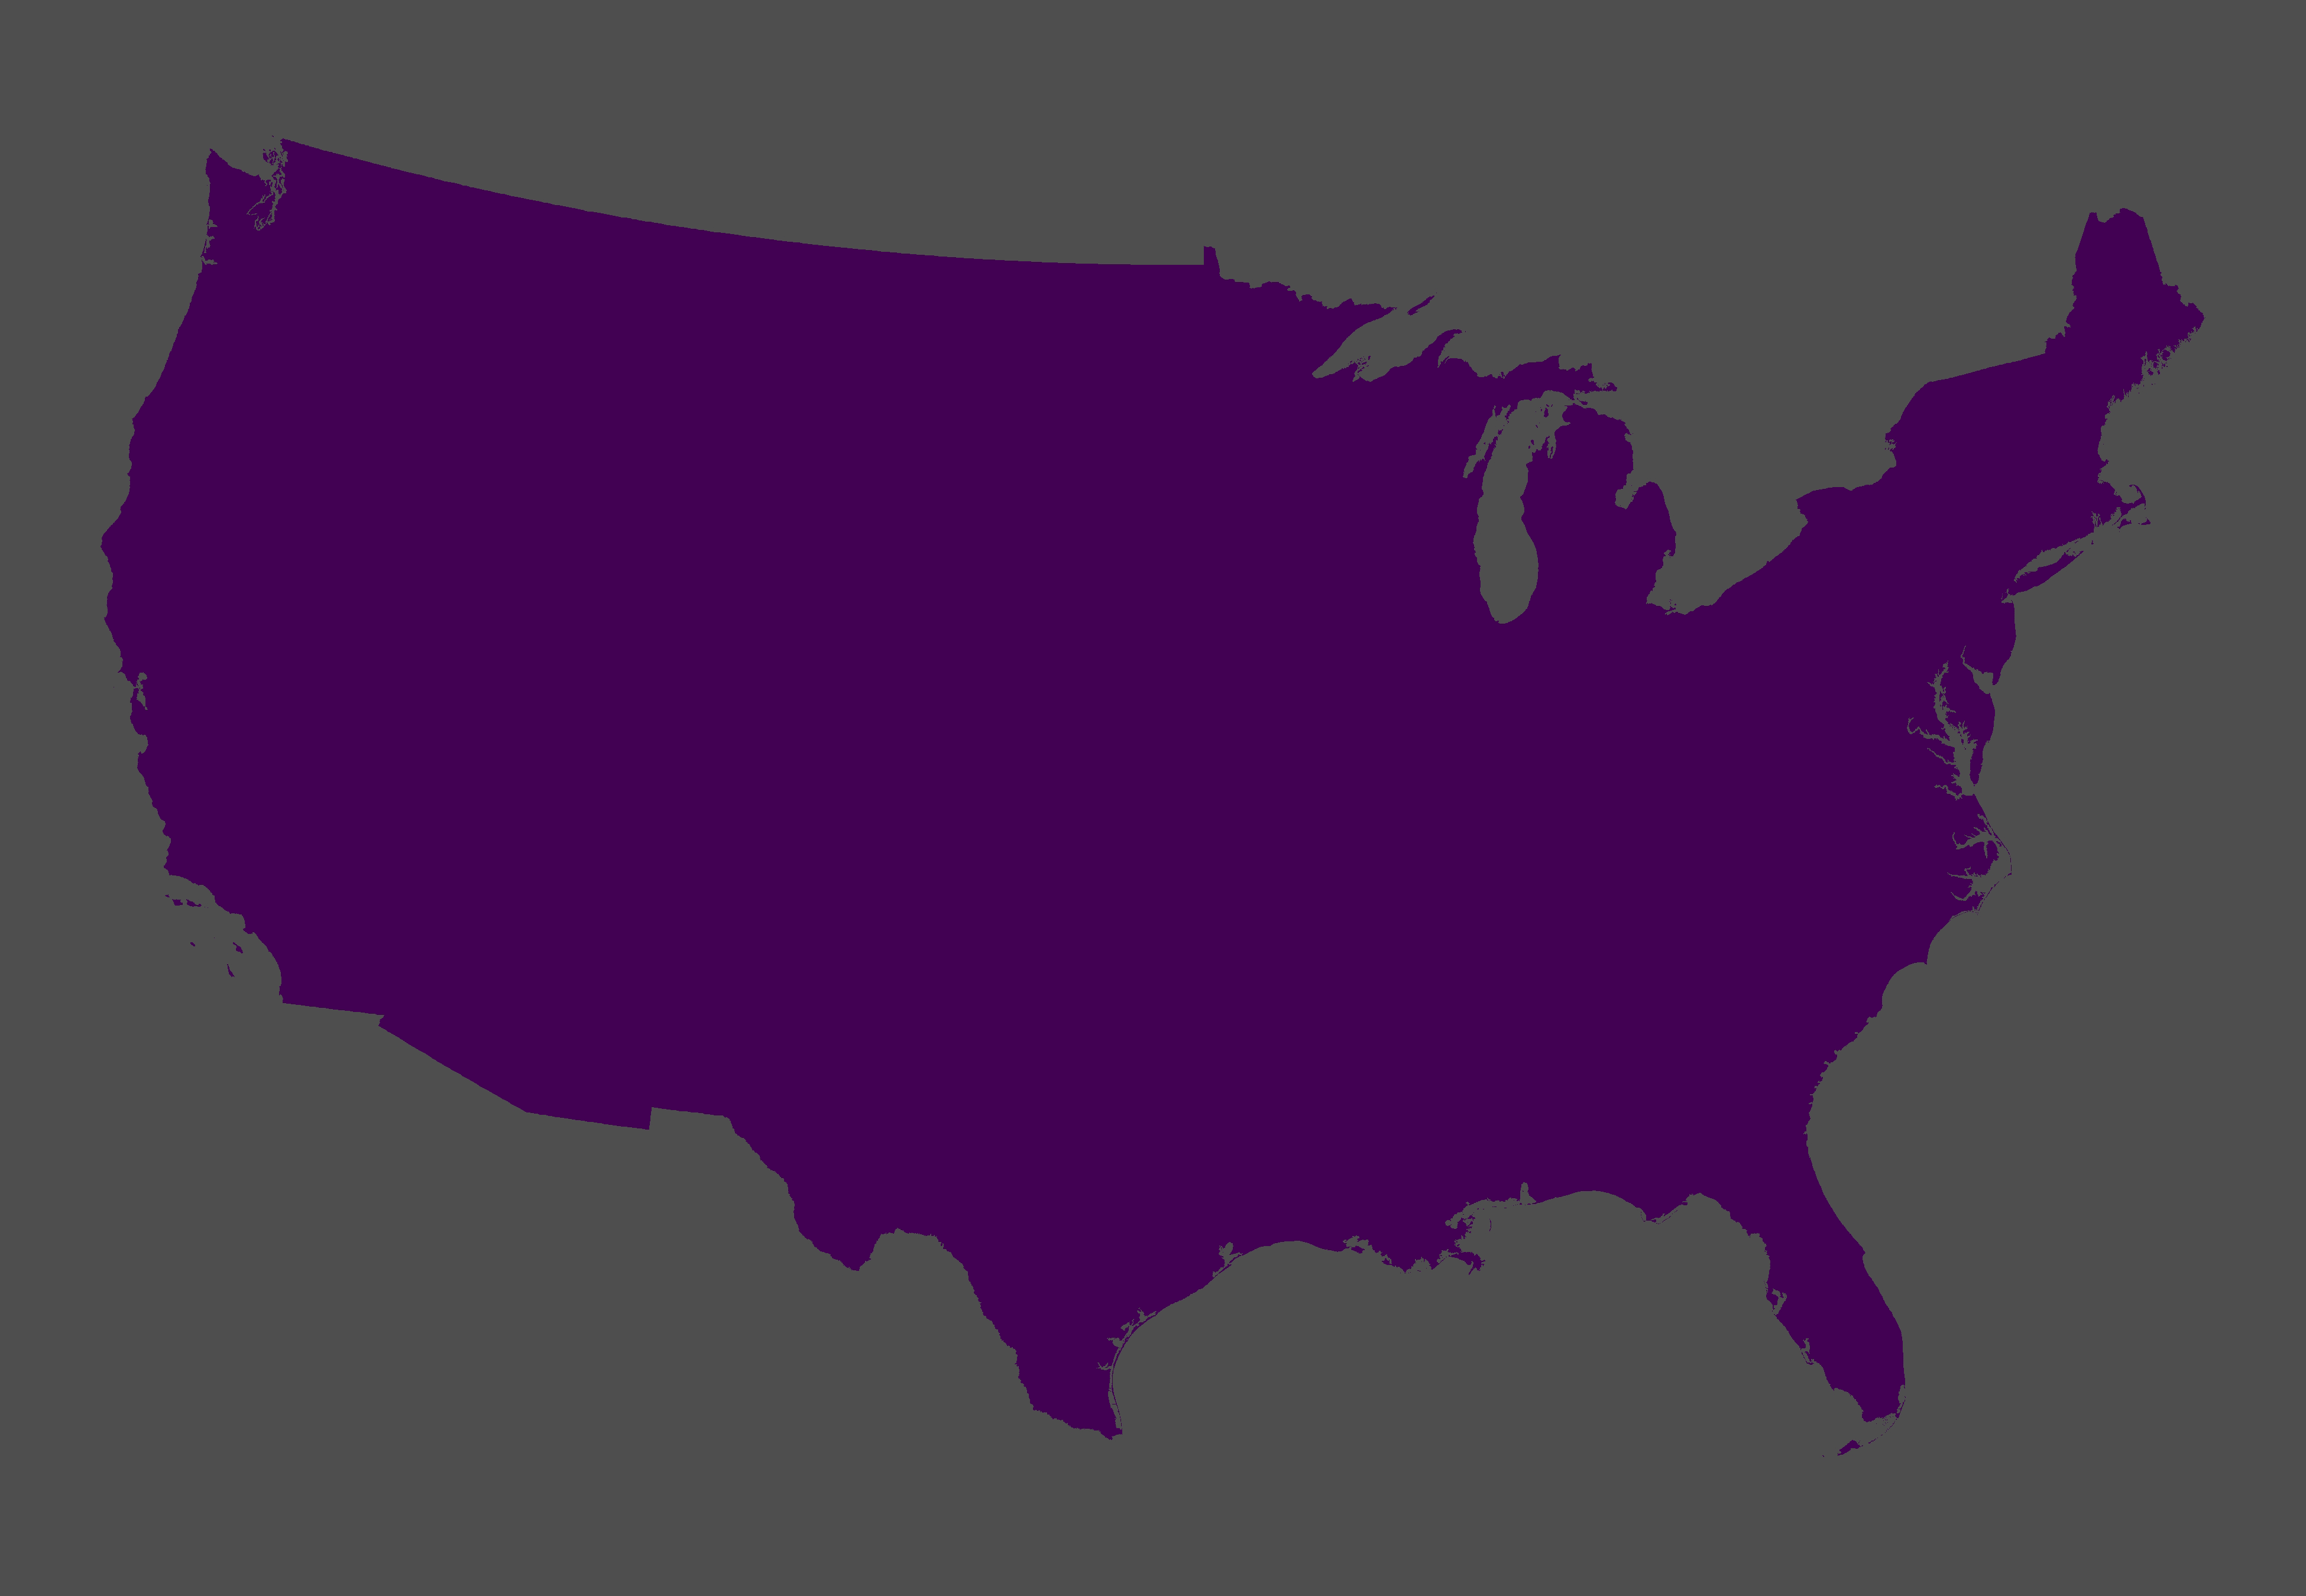 motion graphic of united states in purple with color gradients